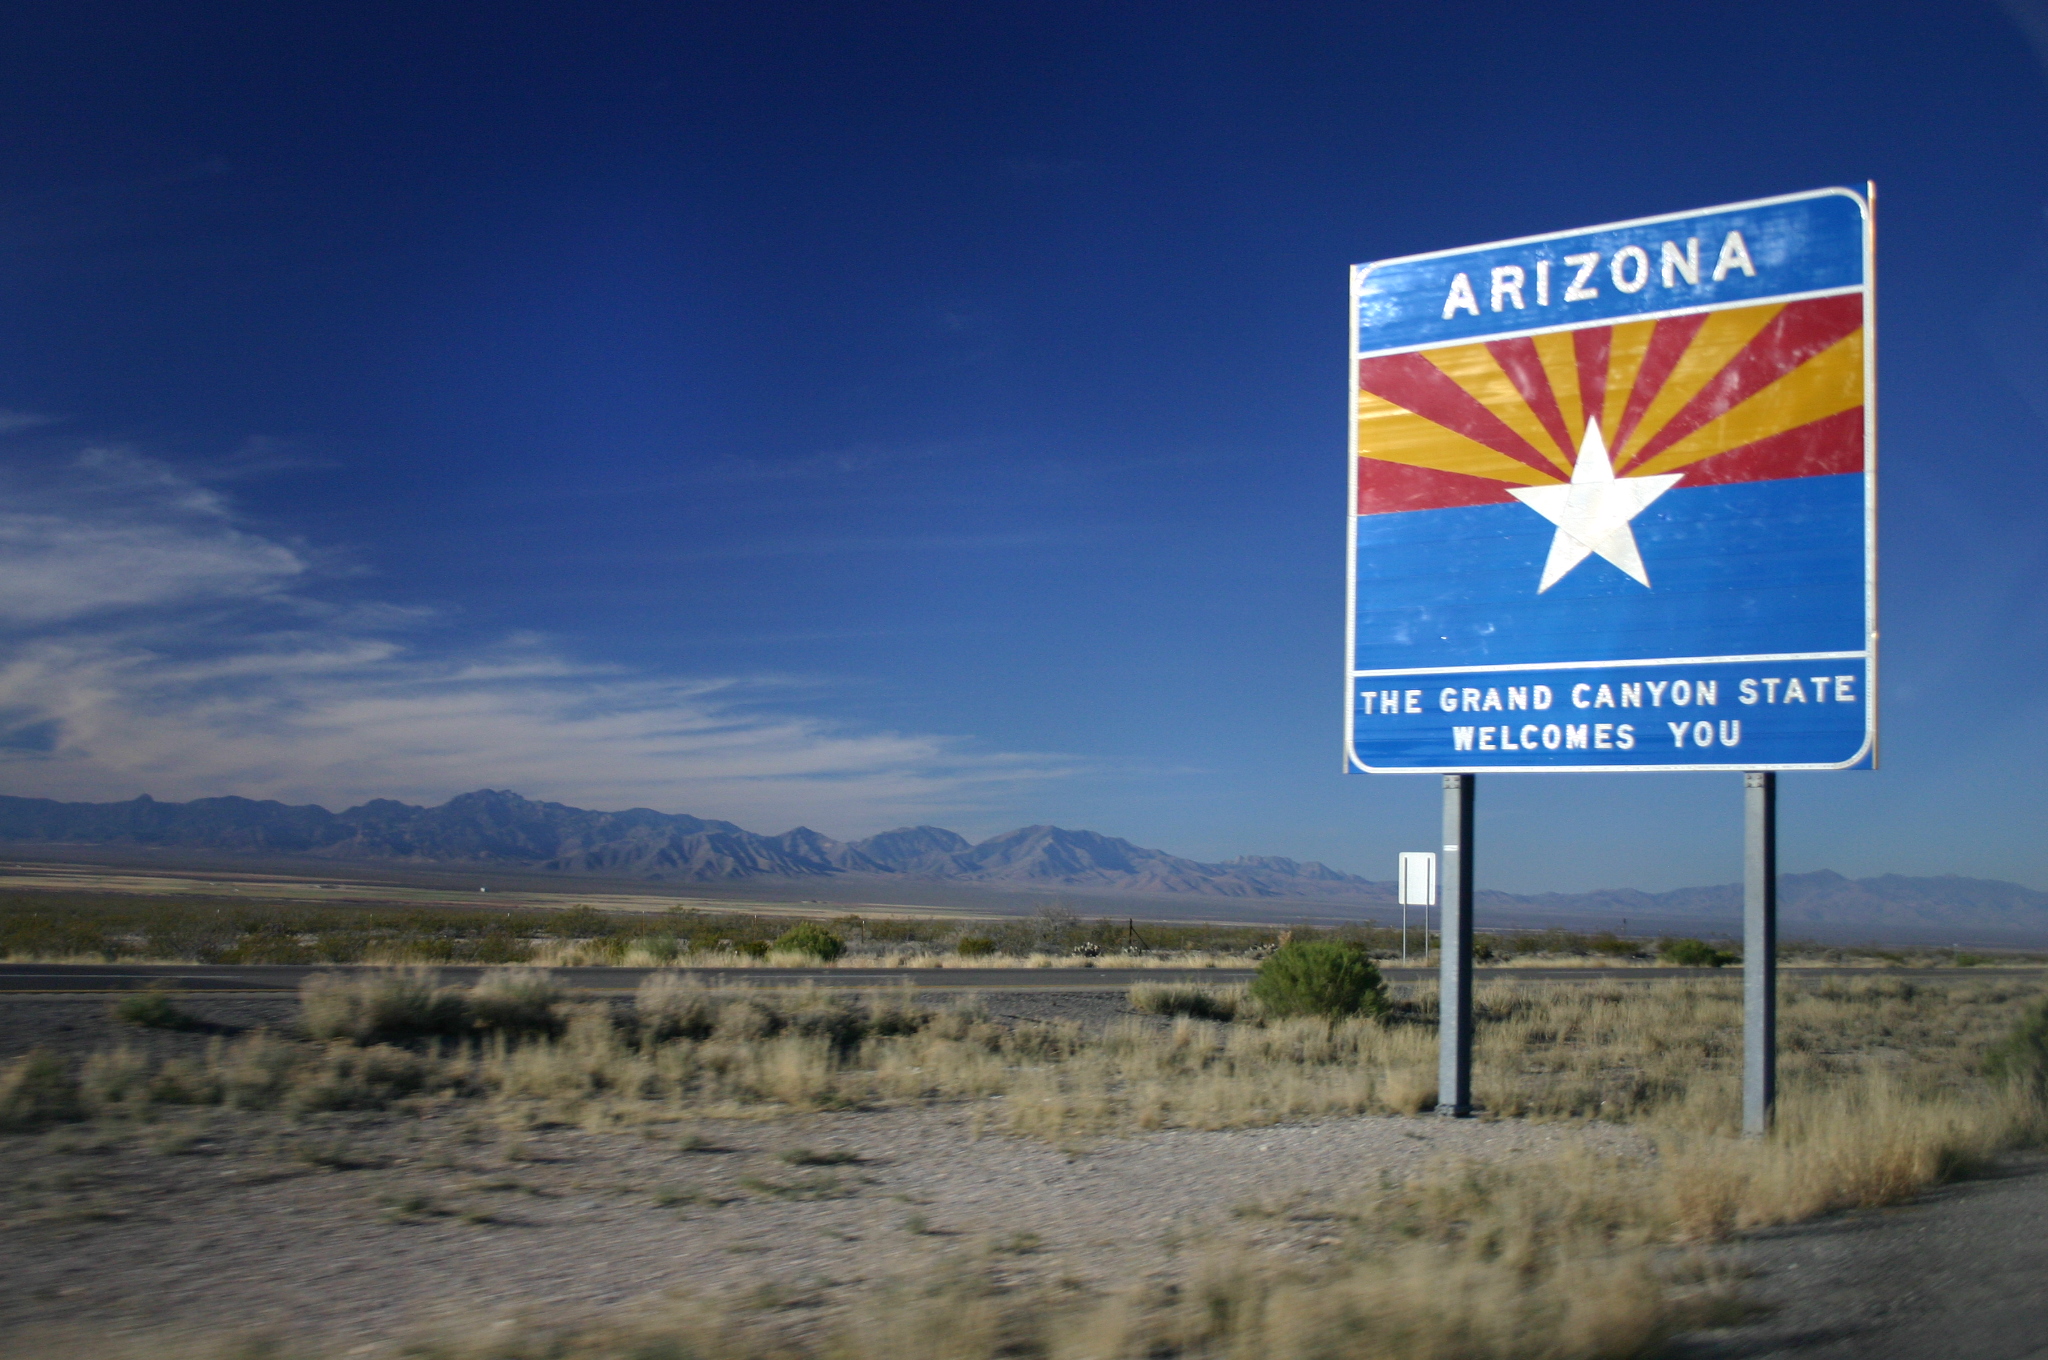 Sign says, "Arizona: The Grand Canyon State welcomes you"